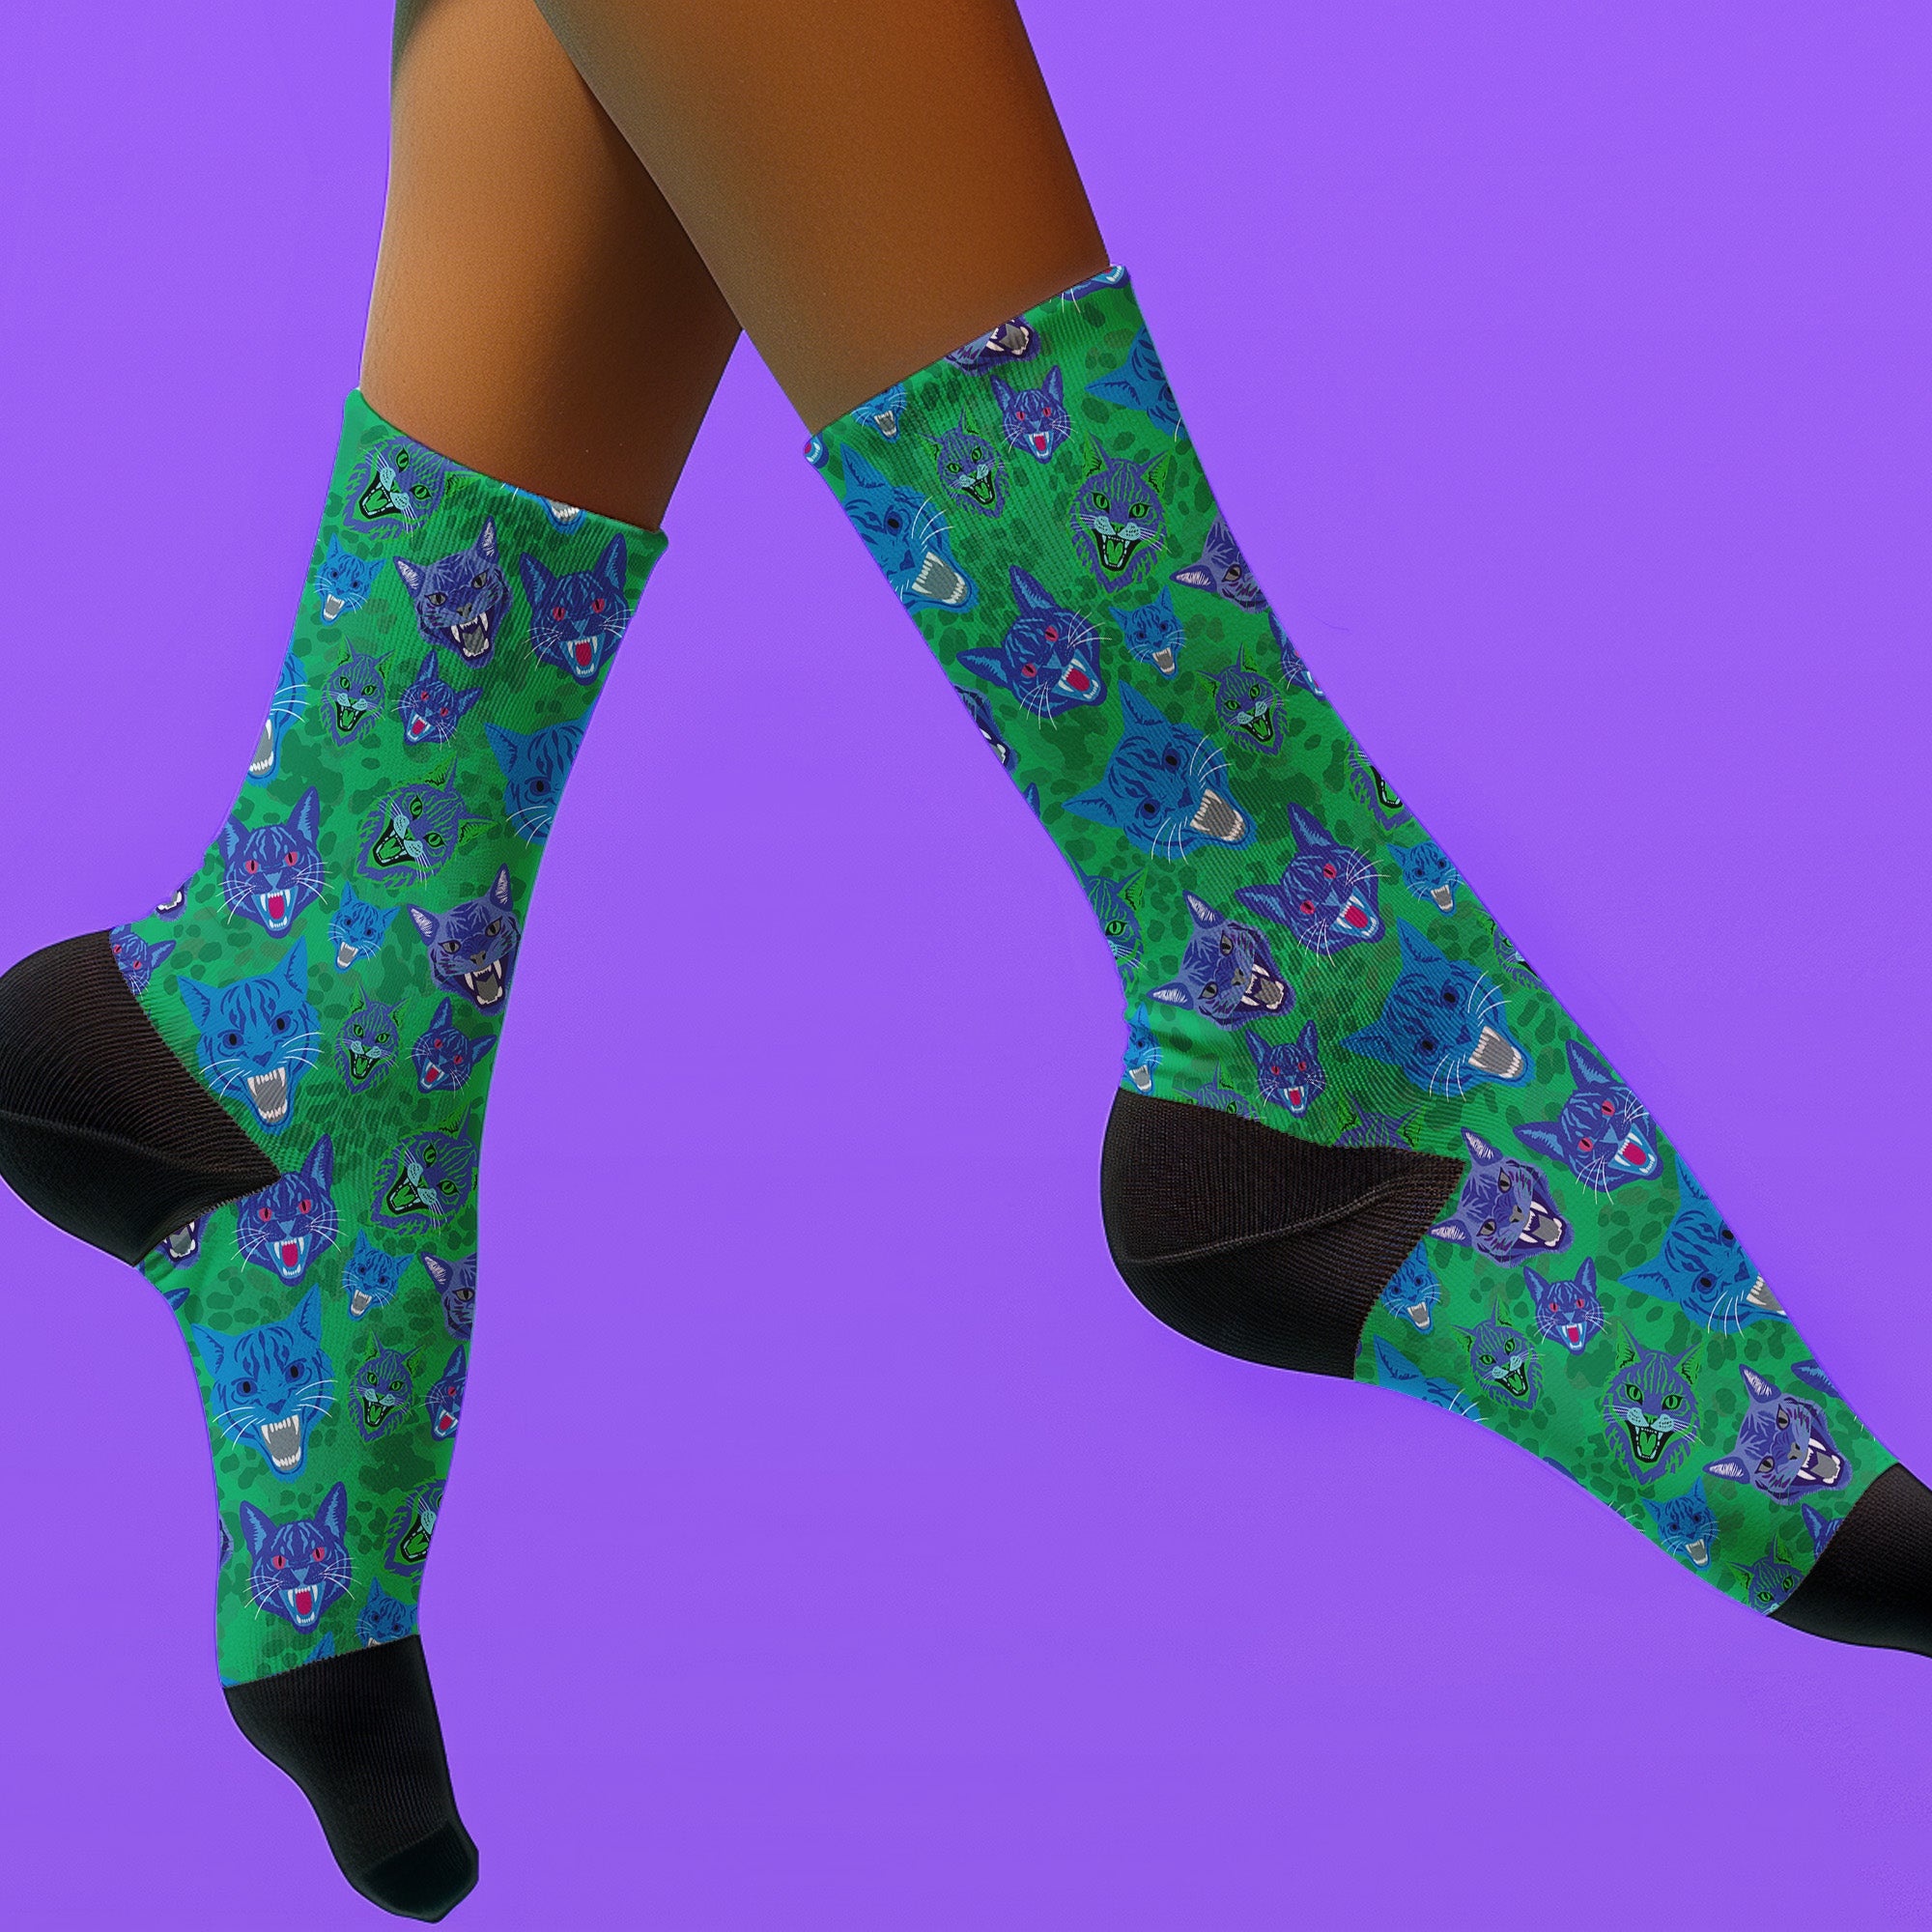 Fun and playful socks adorned with vibrant tiger head motifs on a green background, with black heels and toes, ideal for animal lovers and those who enjoy unique designs